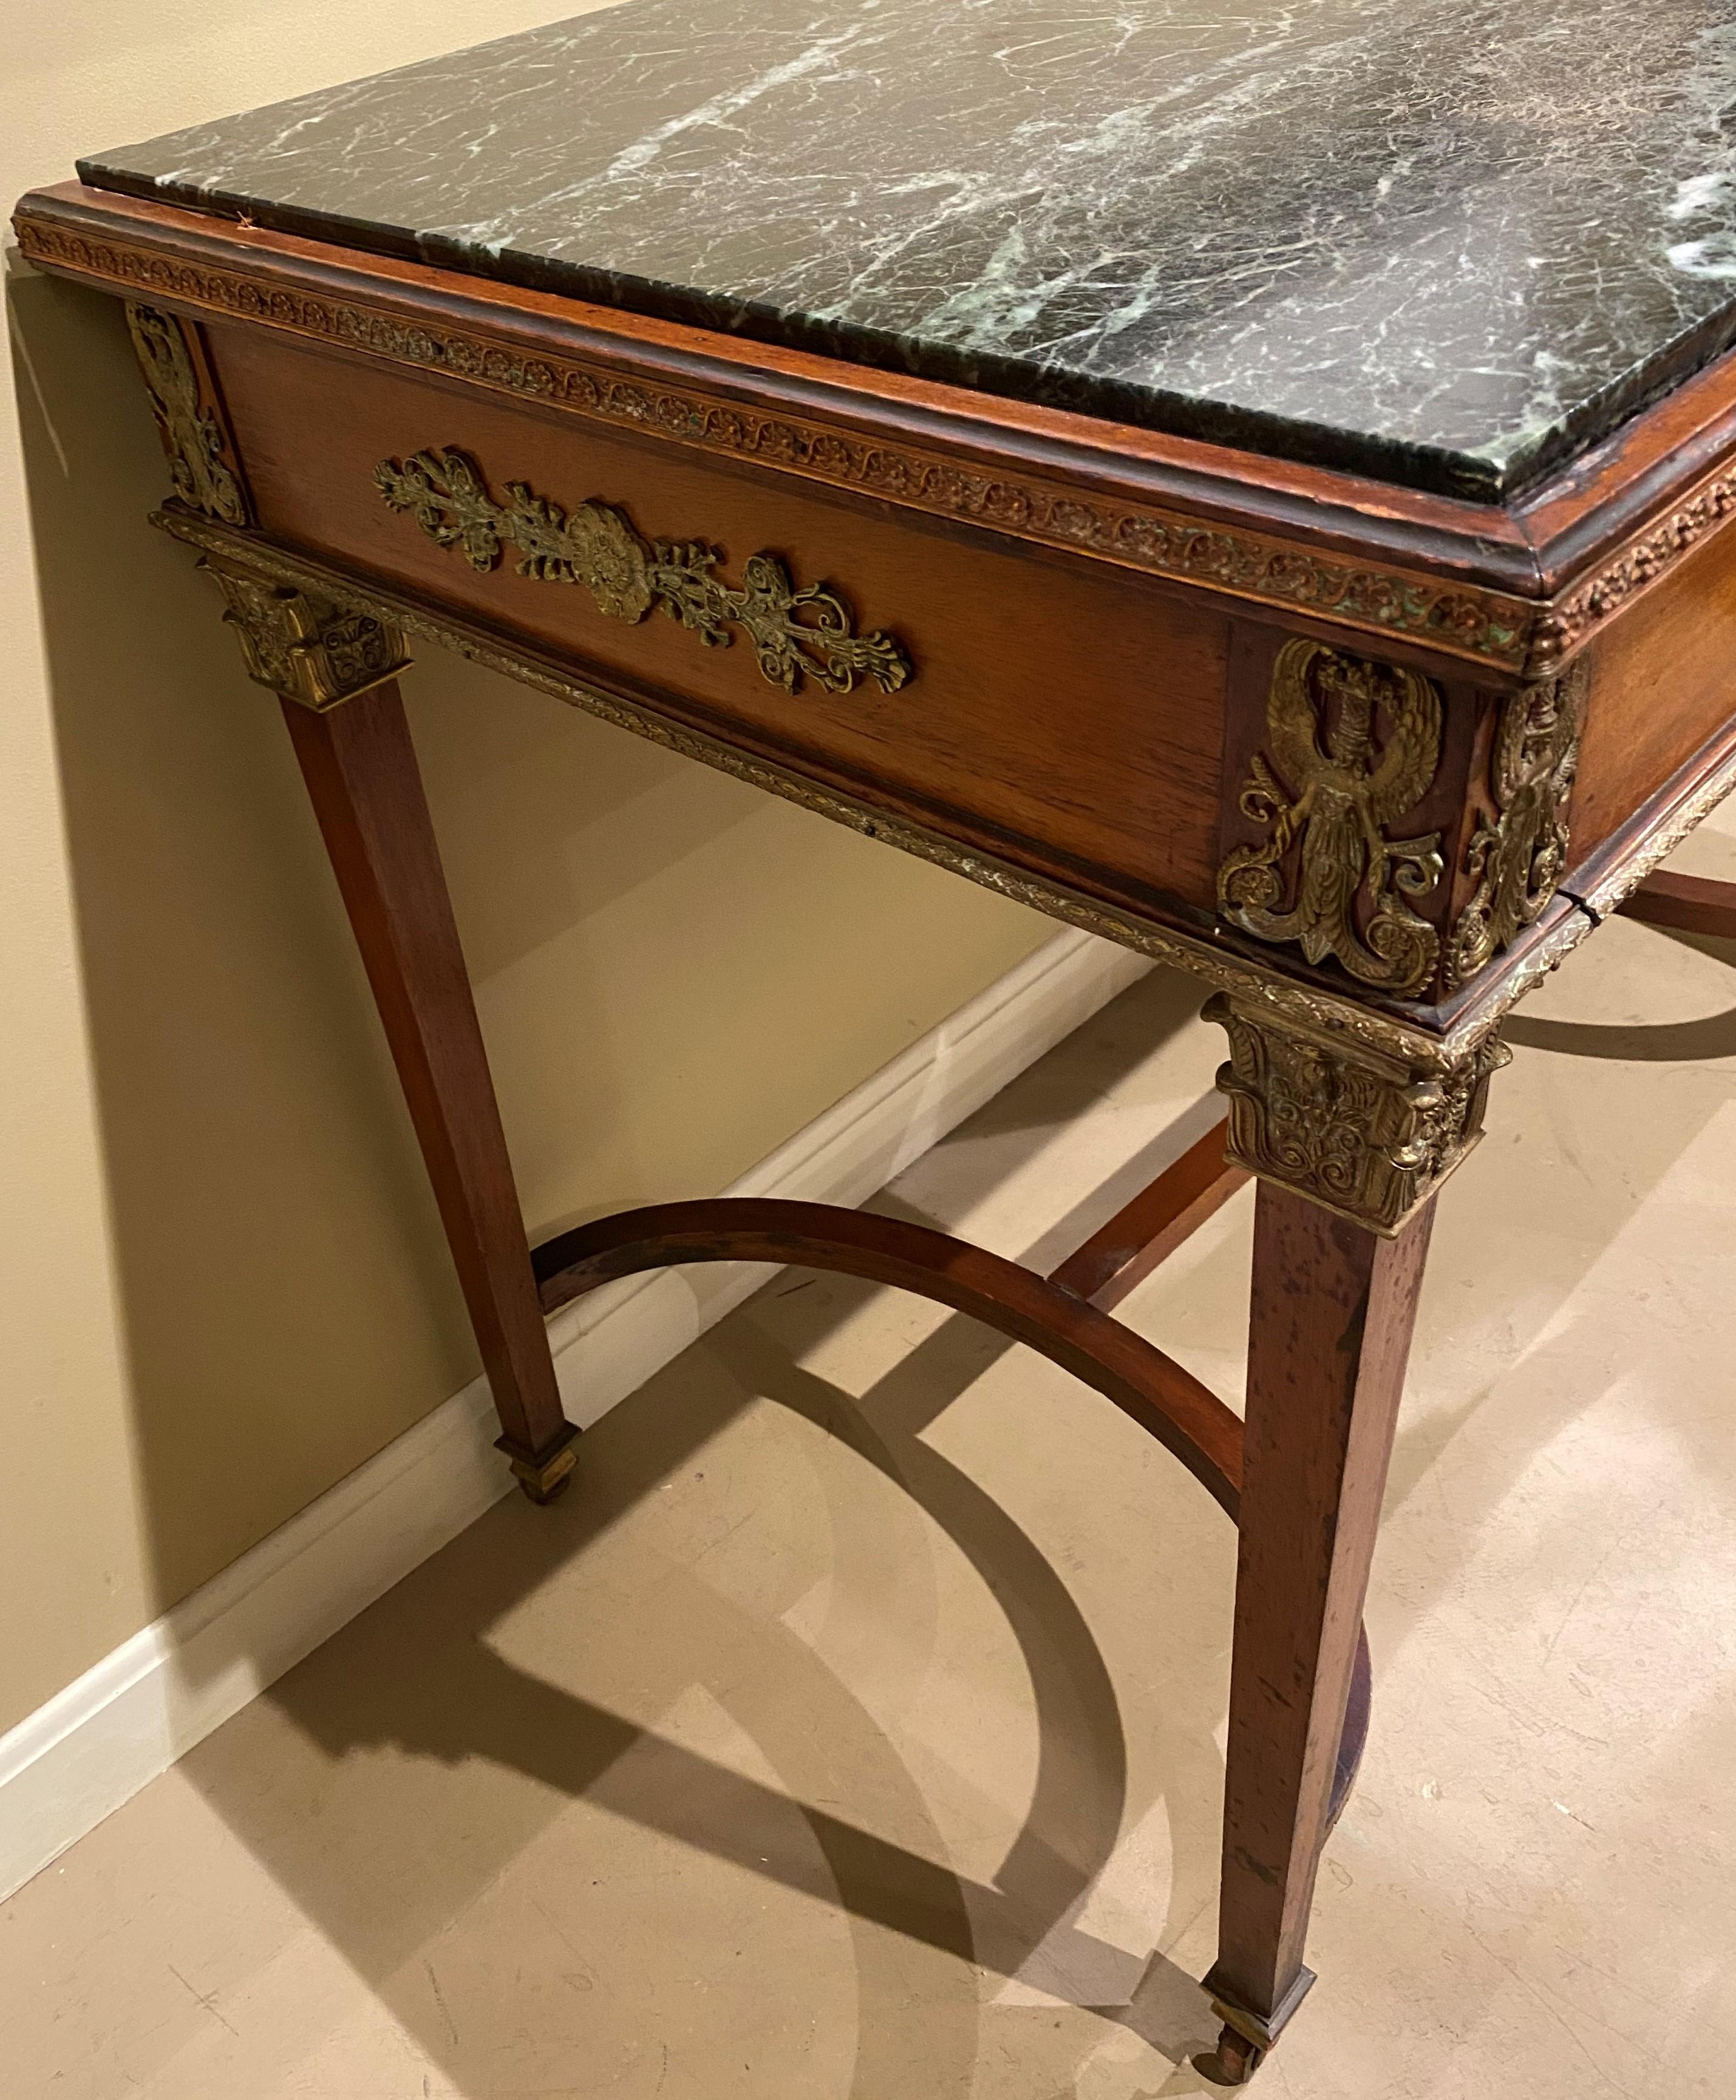 RJ Horner & Co French Marble Top One-Drawer Writing Table with Ormolu In Good Condition For Sale In Milford, NH